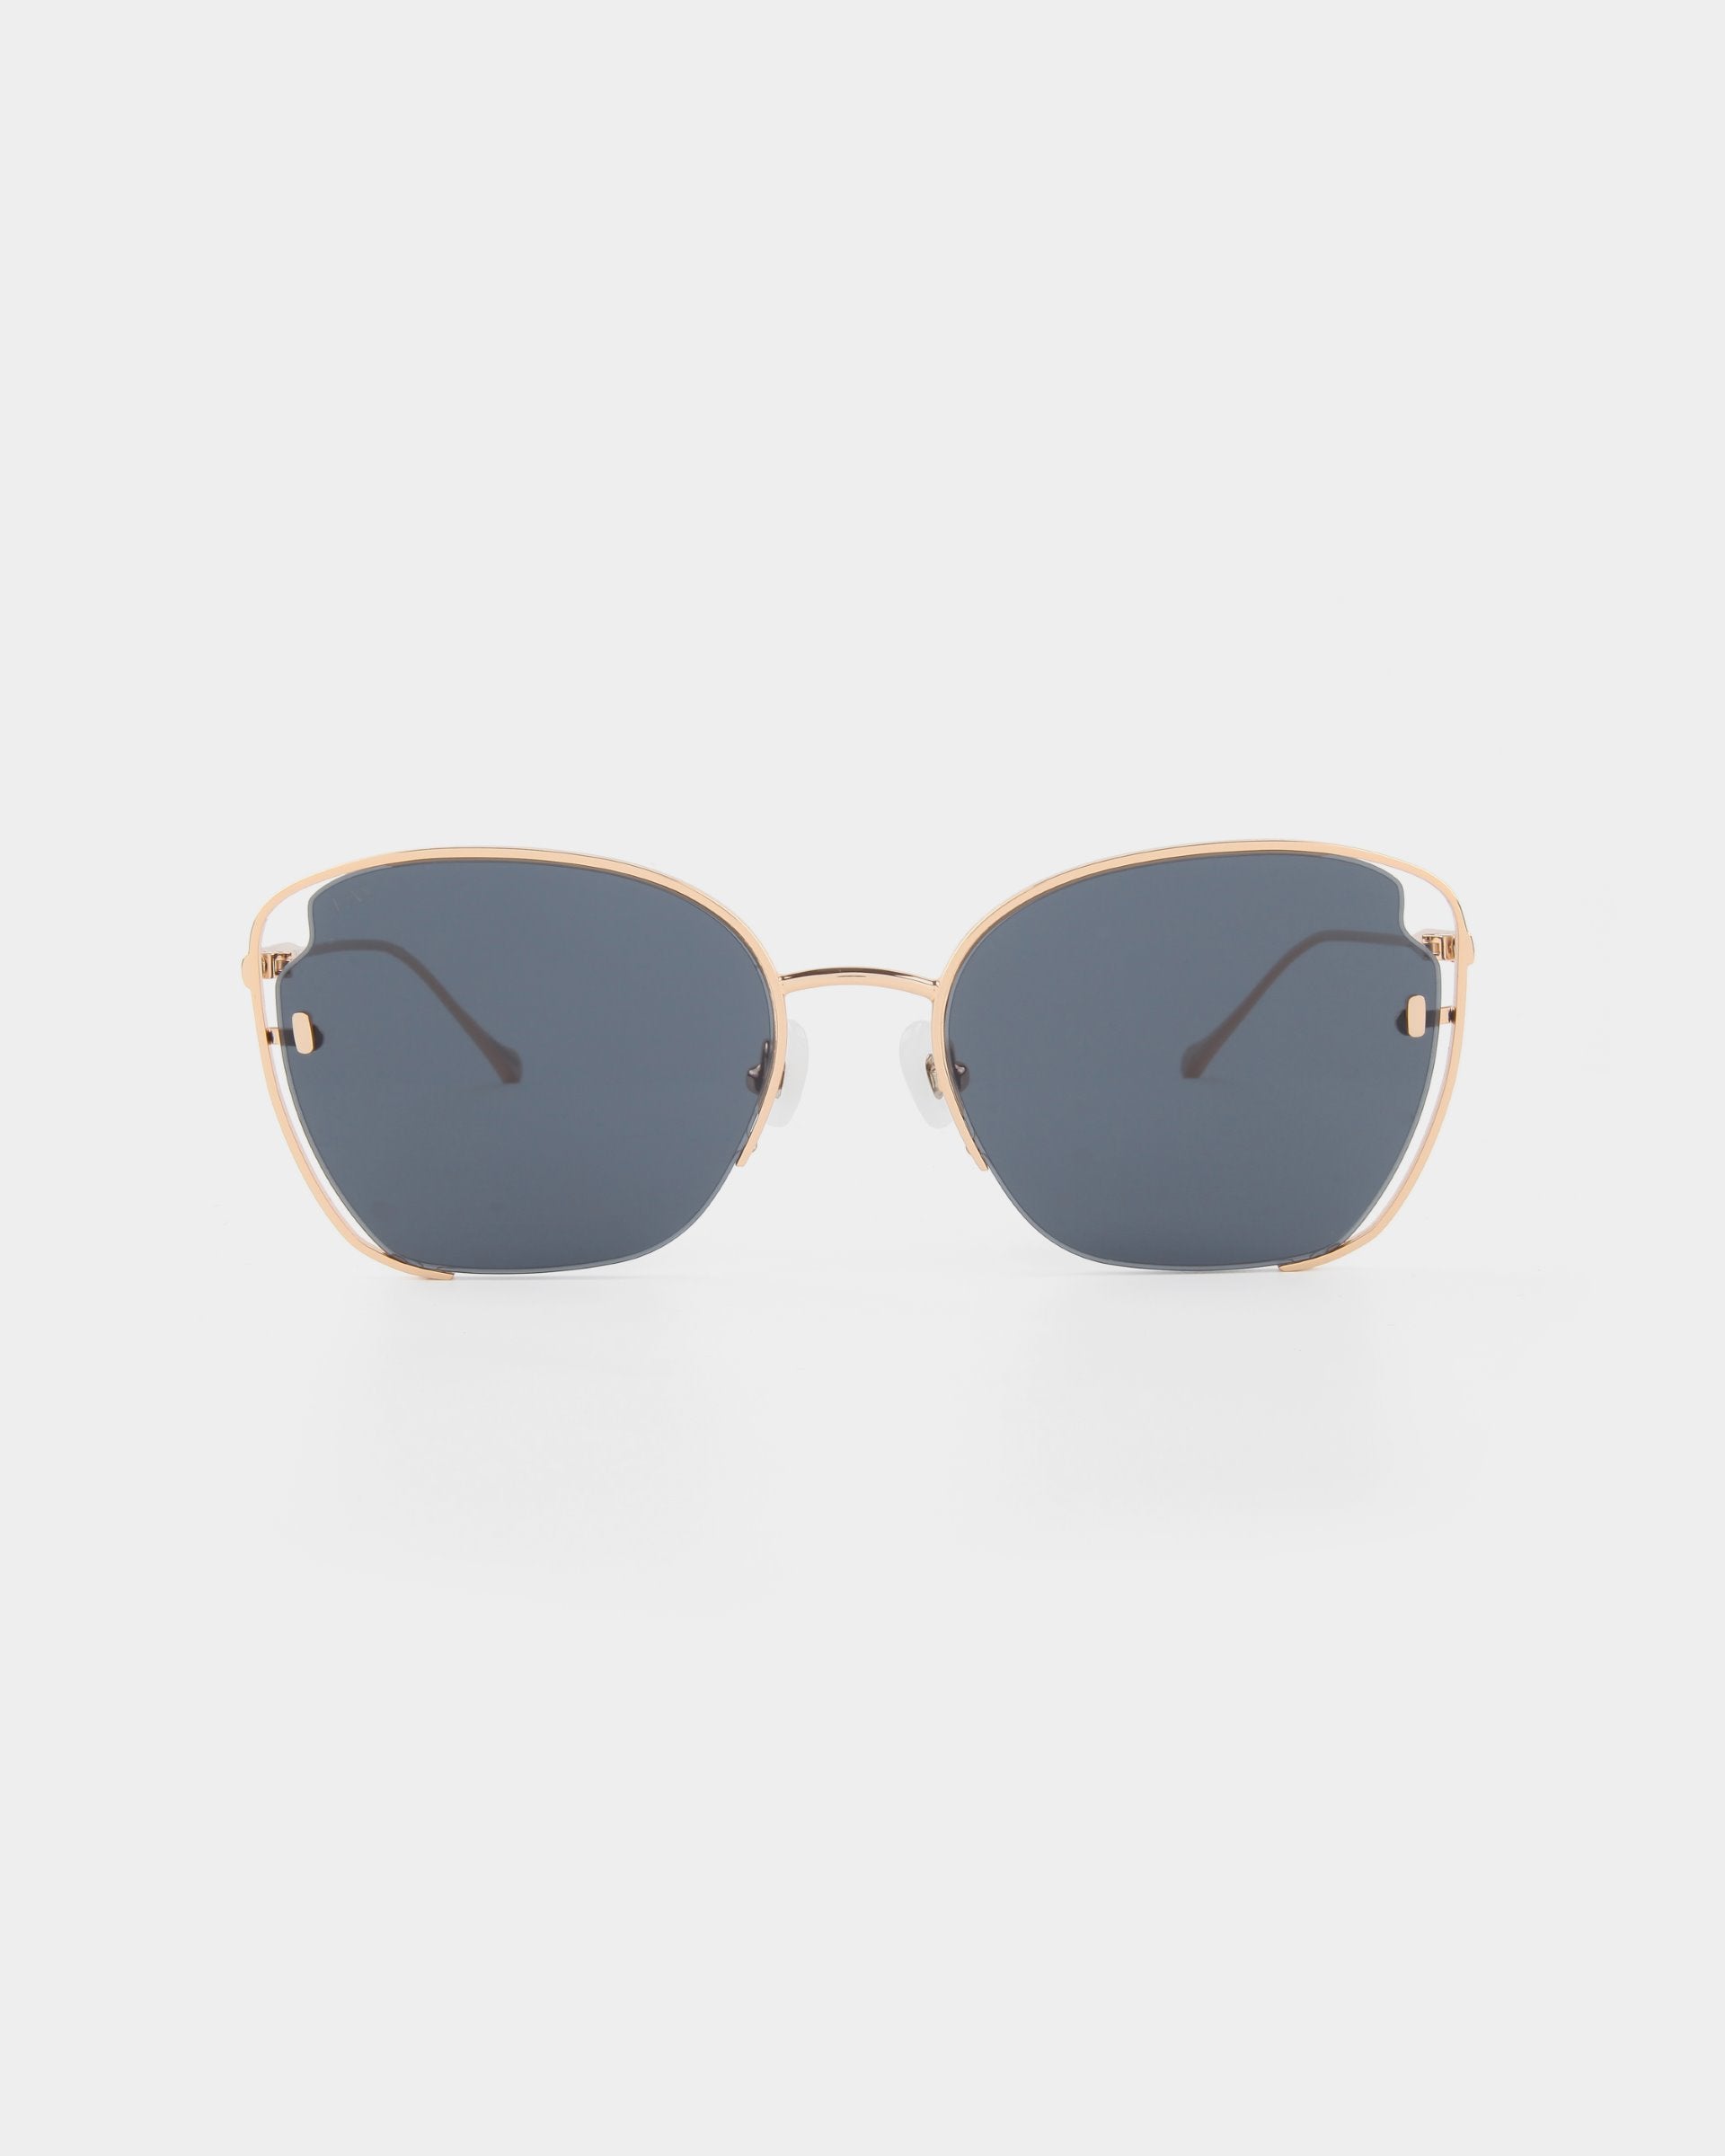 A pair of For Art&#39;s Sake® Eden sunglasses with 18-karat gold plated frames and dark blue-tinted, UVA &amp; UVB-protected lenses viewed from the front against a white background. The frames have a slight curve at the top and thin temples with black tips.